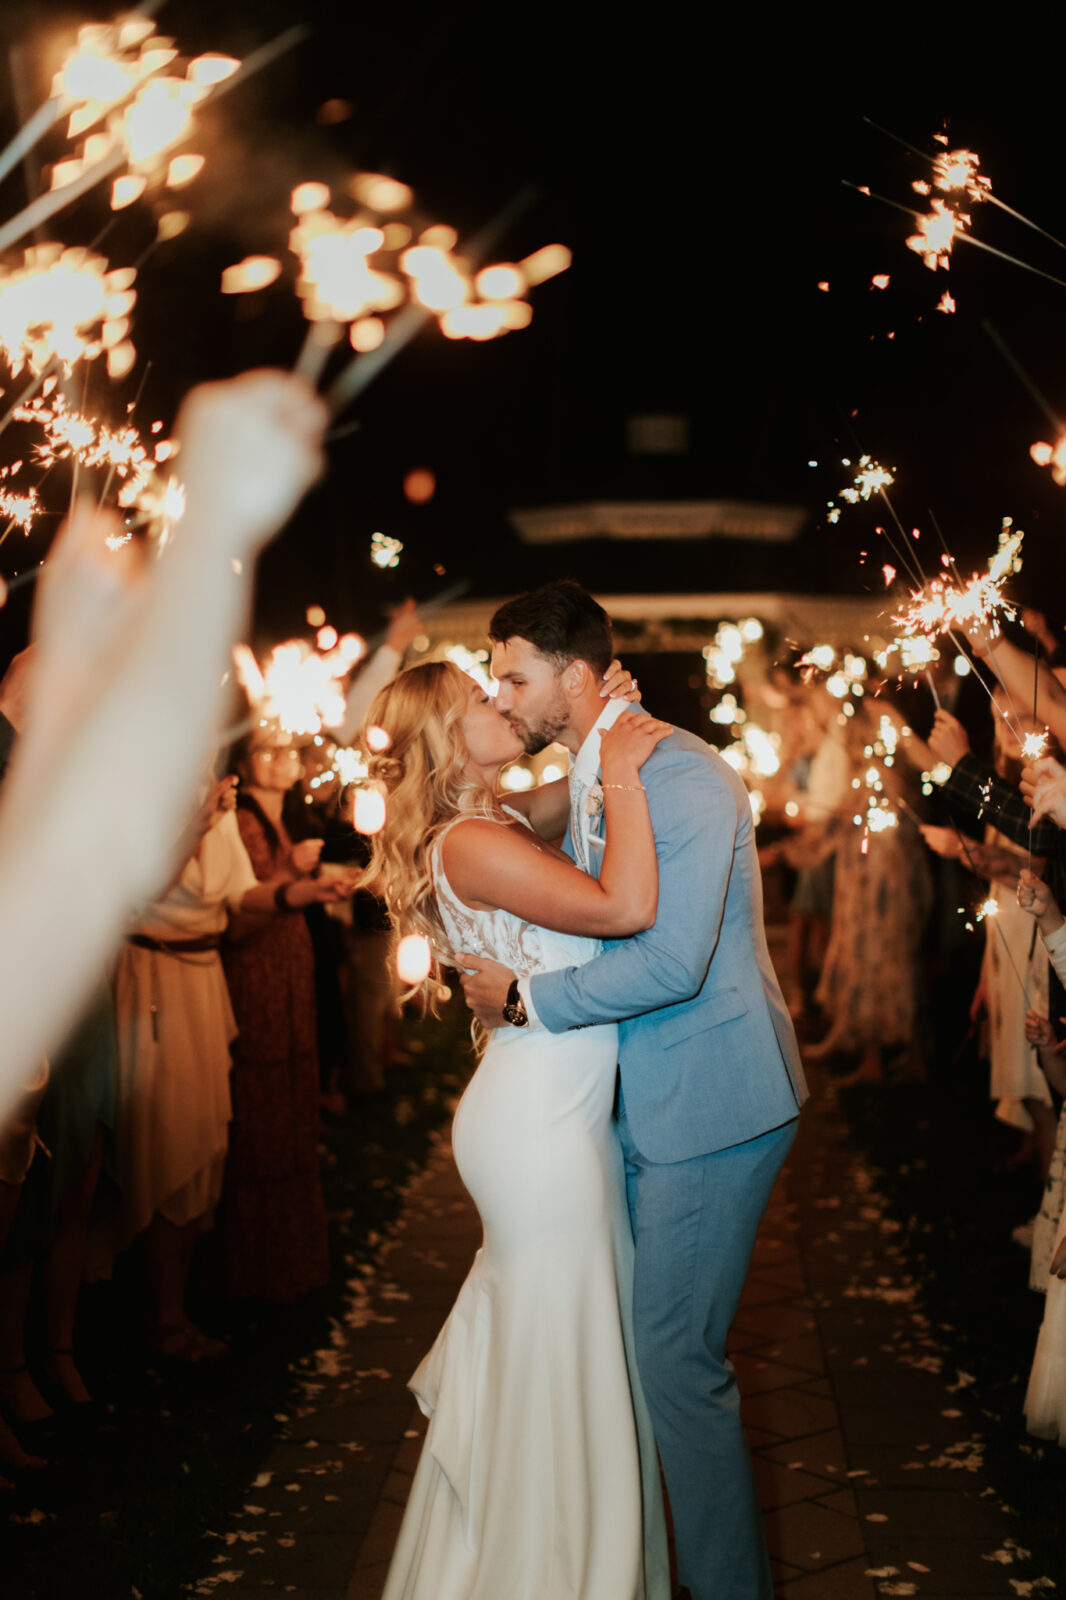 This Lethbridge wedding at Norland Historic Estate features a sparkler exit, vintage blue suits, and an old-school getaway. vintage getaway car, vintage meets classic wedding inspiration, summer wedding inspiration